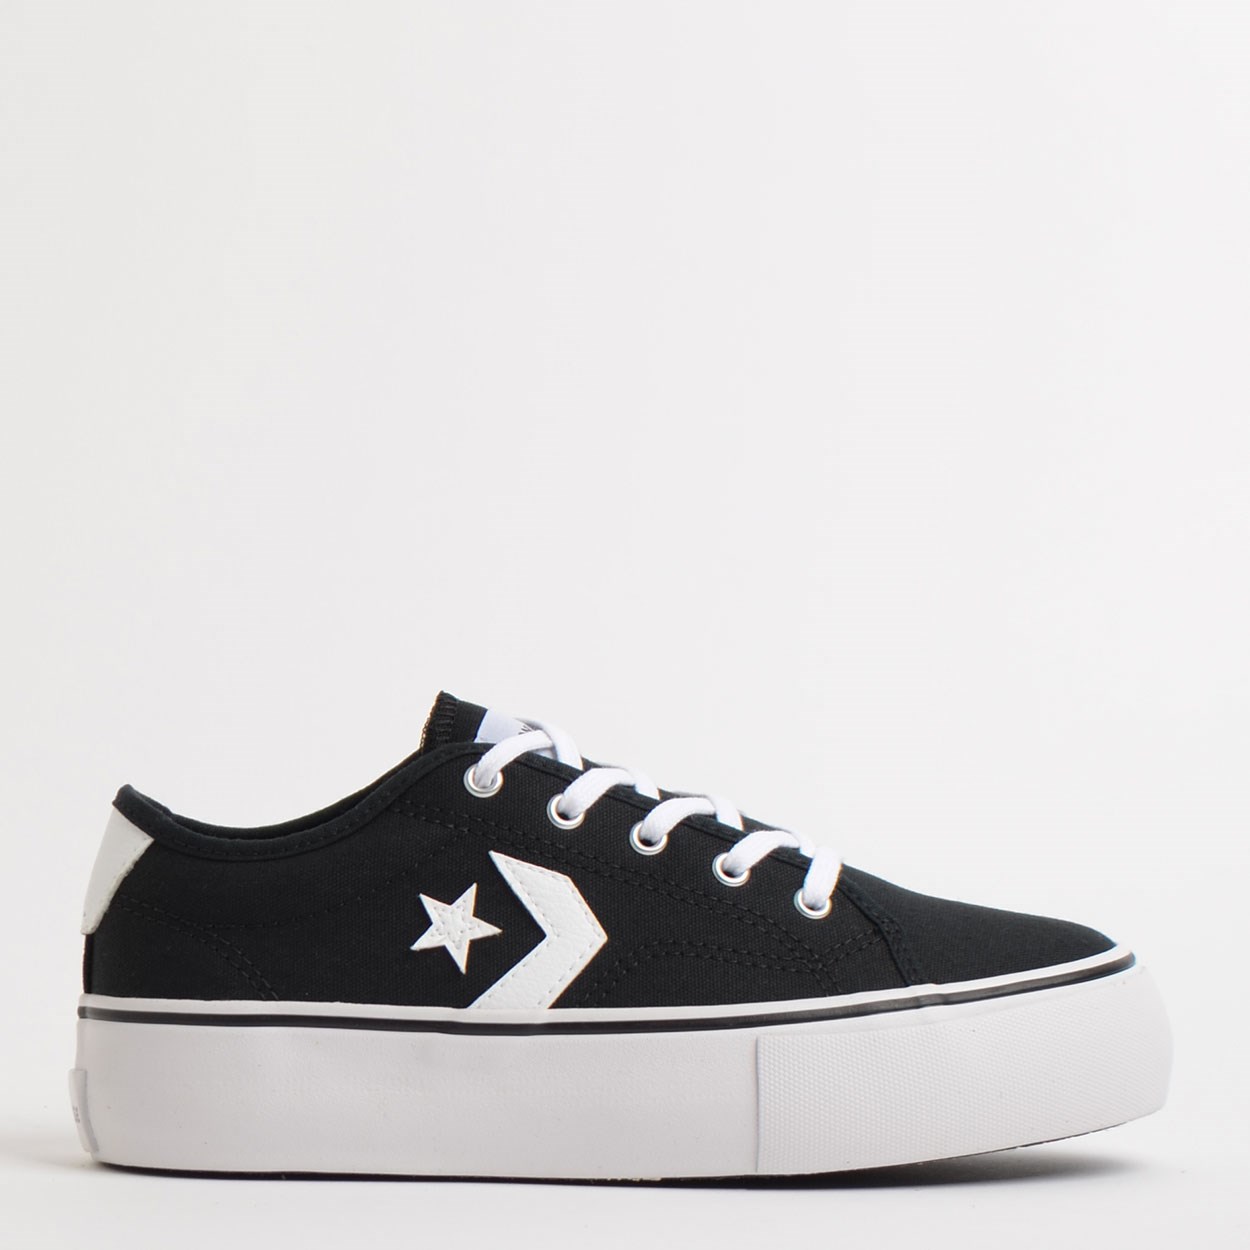 converse all star replay